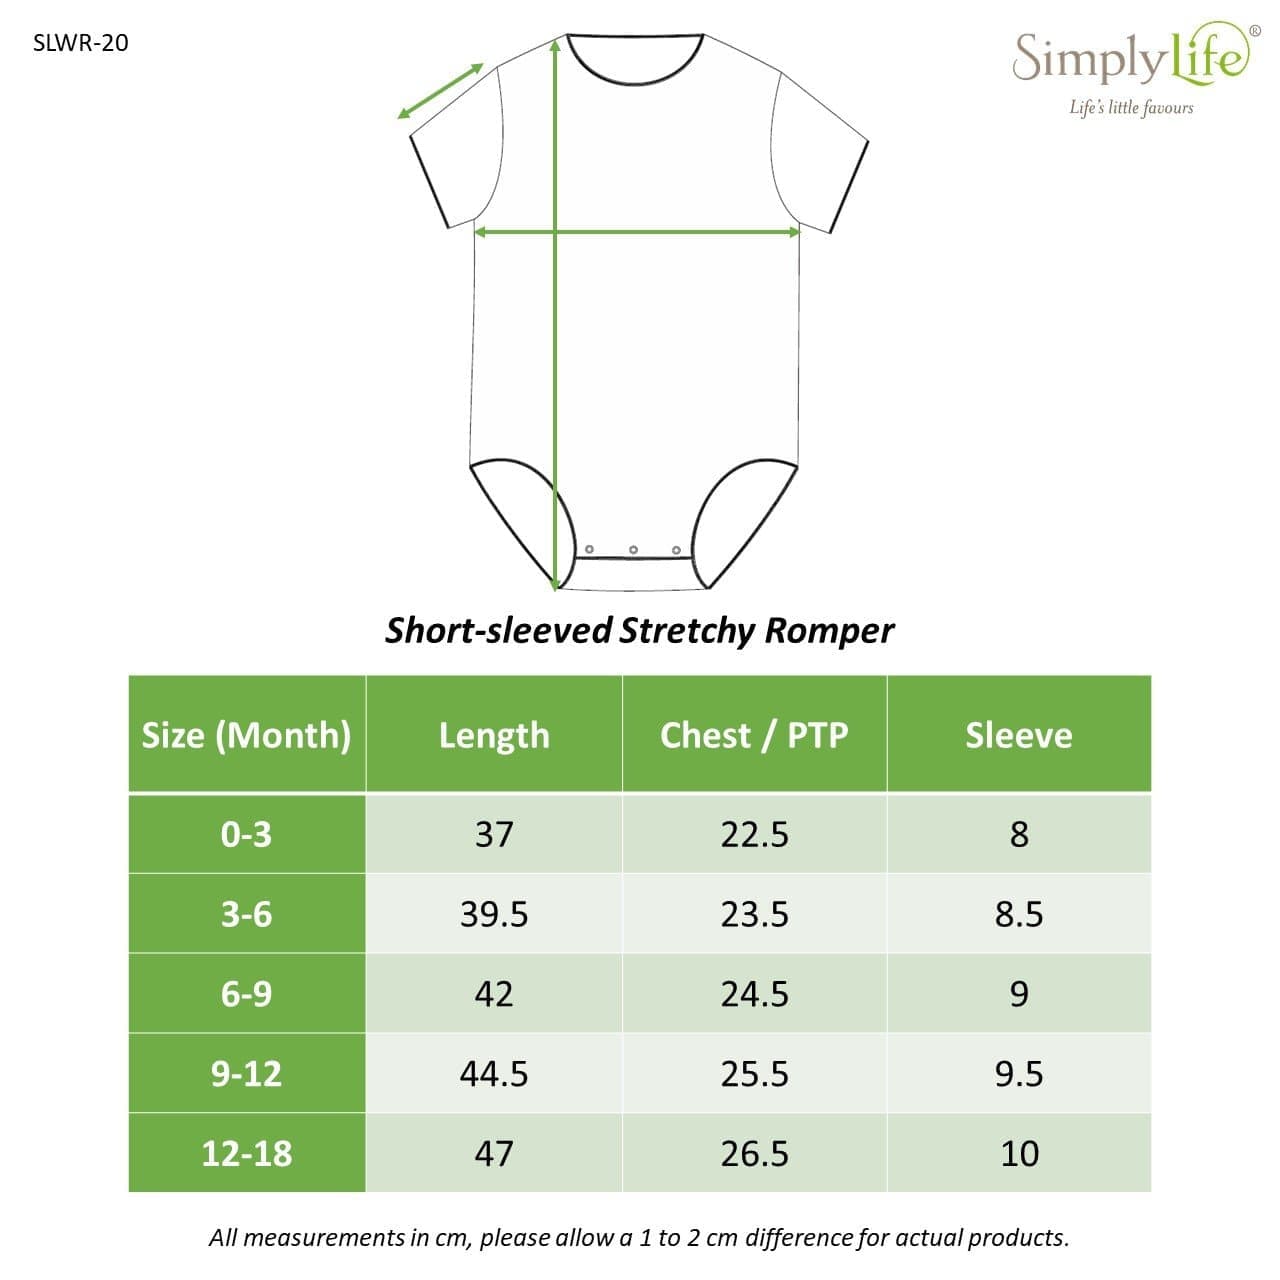 Scandinavian Leaves and Sandwash Ruby Red - Short-sleeved Stretchy Romper (Value Pack of 2) - Simply Life